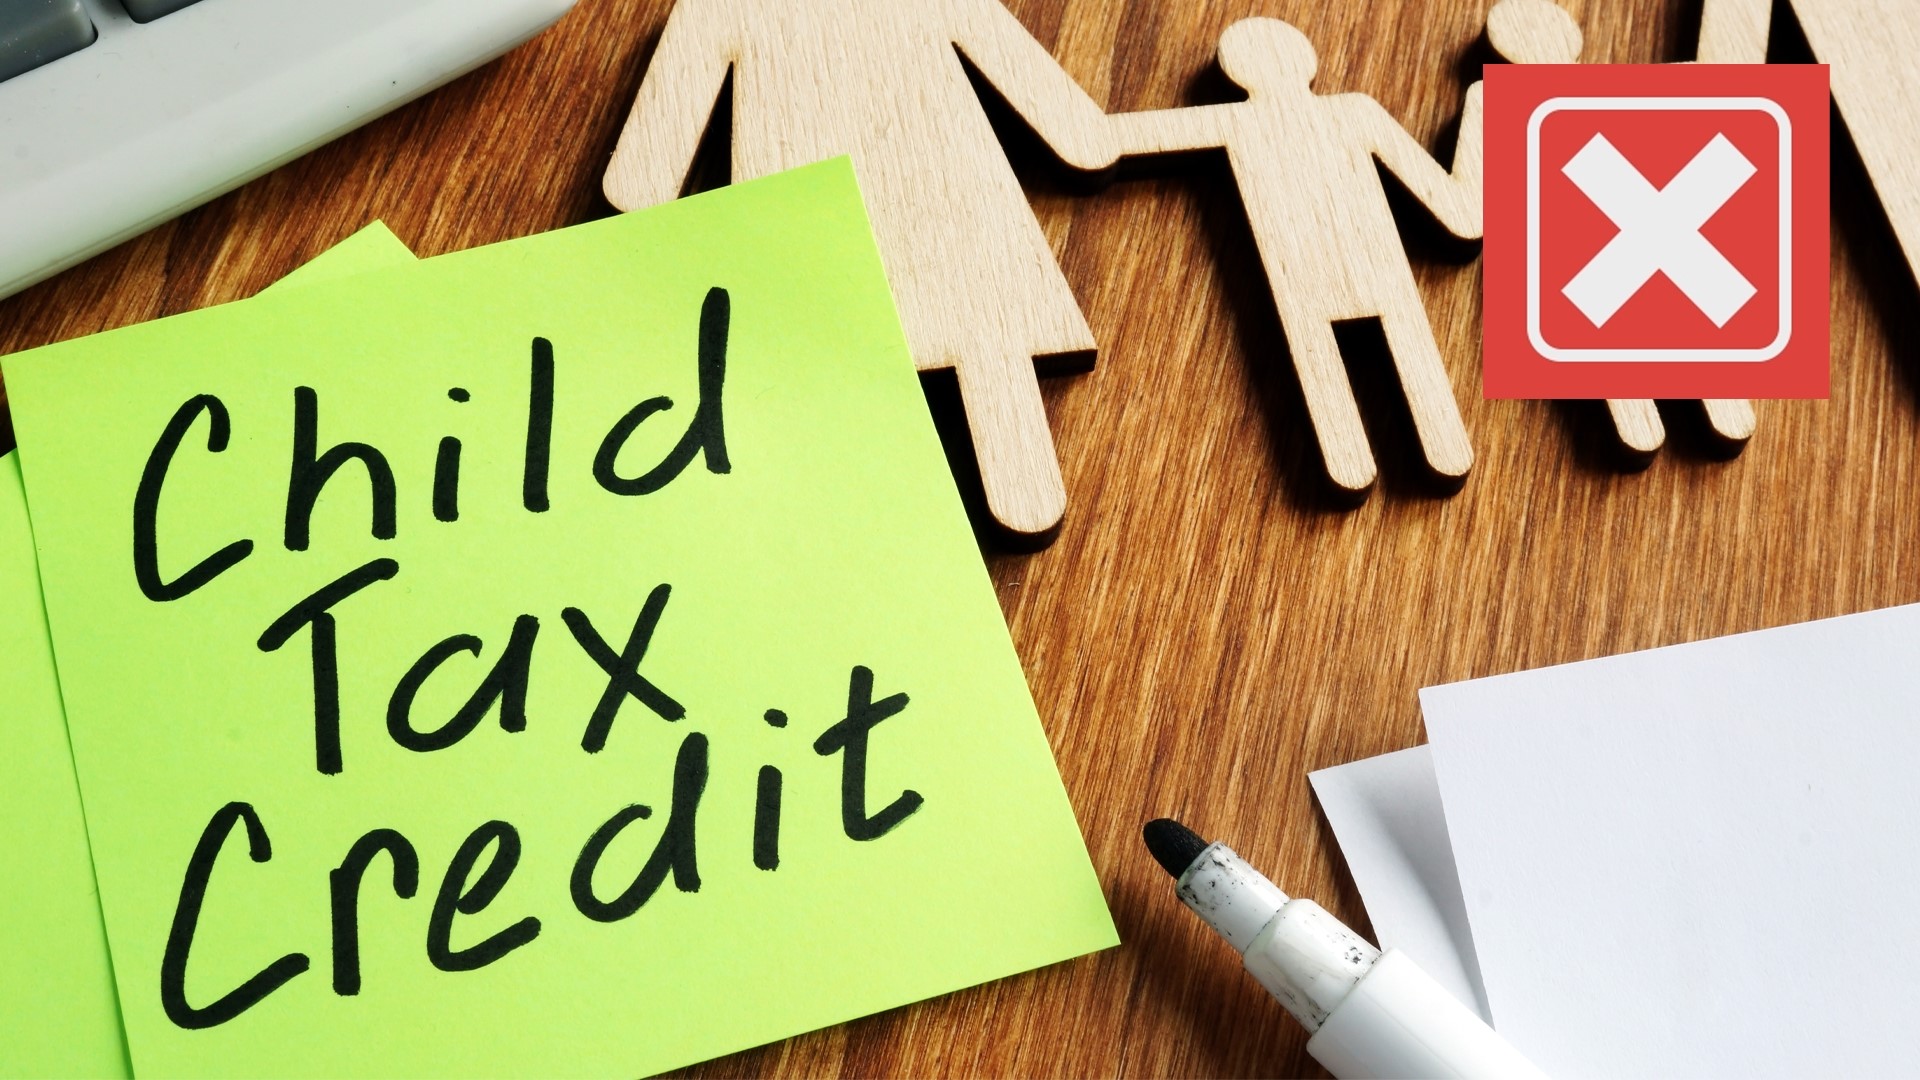 Parents will still be able to claim the Child Tax Credit on their taxes, but there are a few changes to know about.